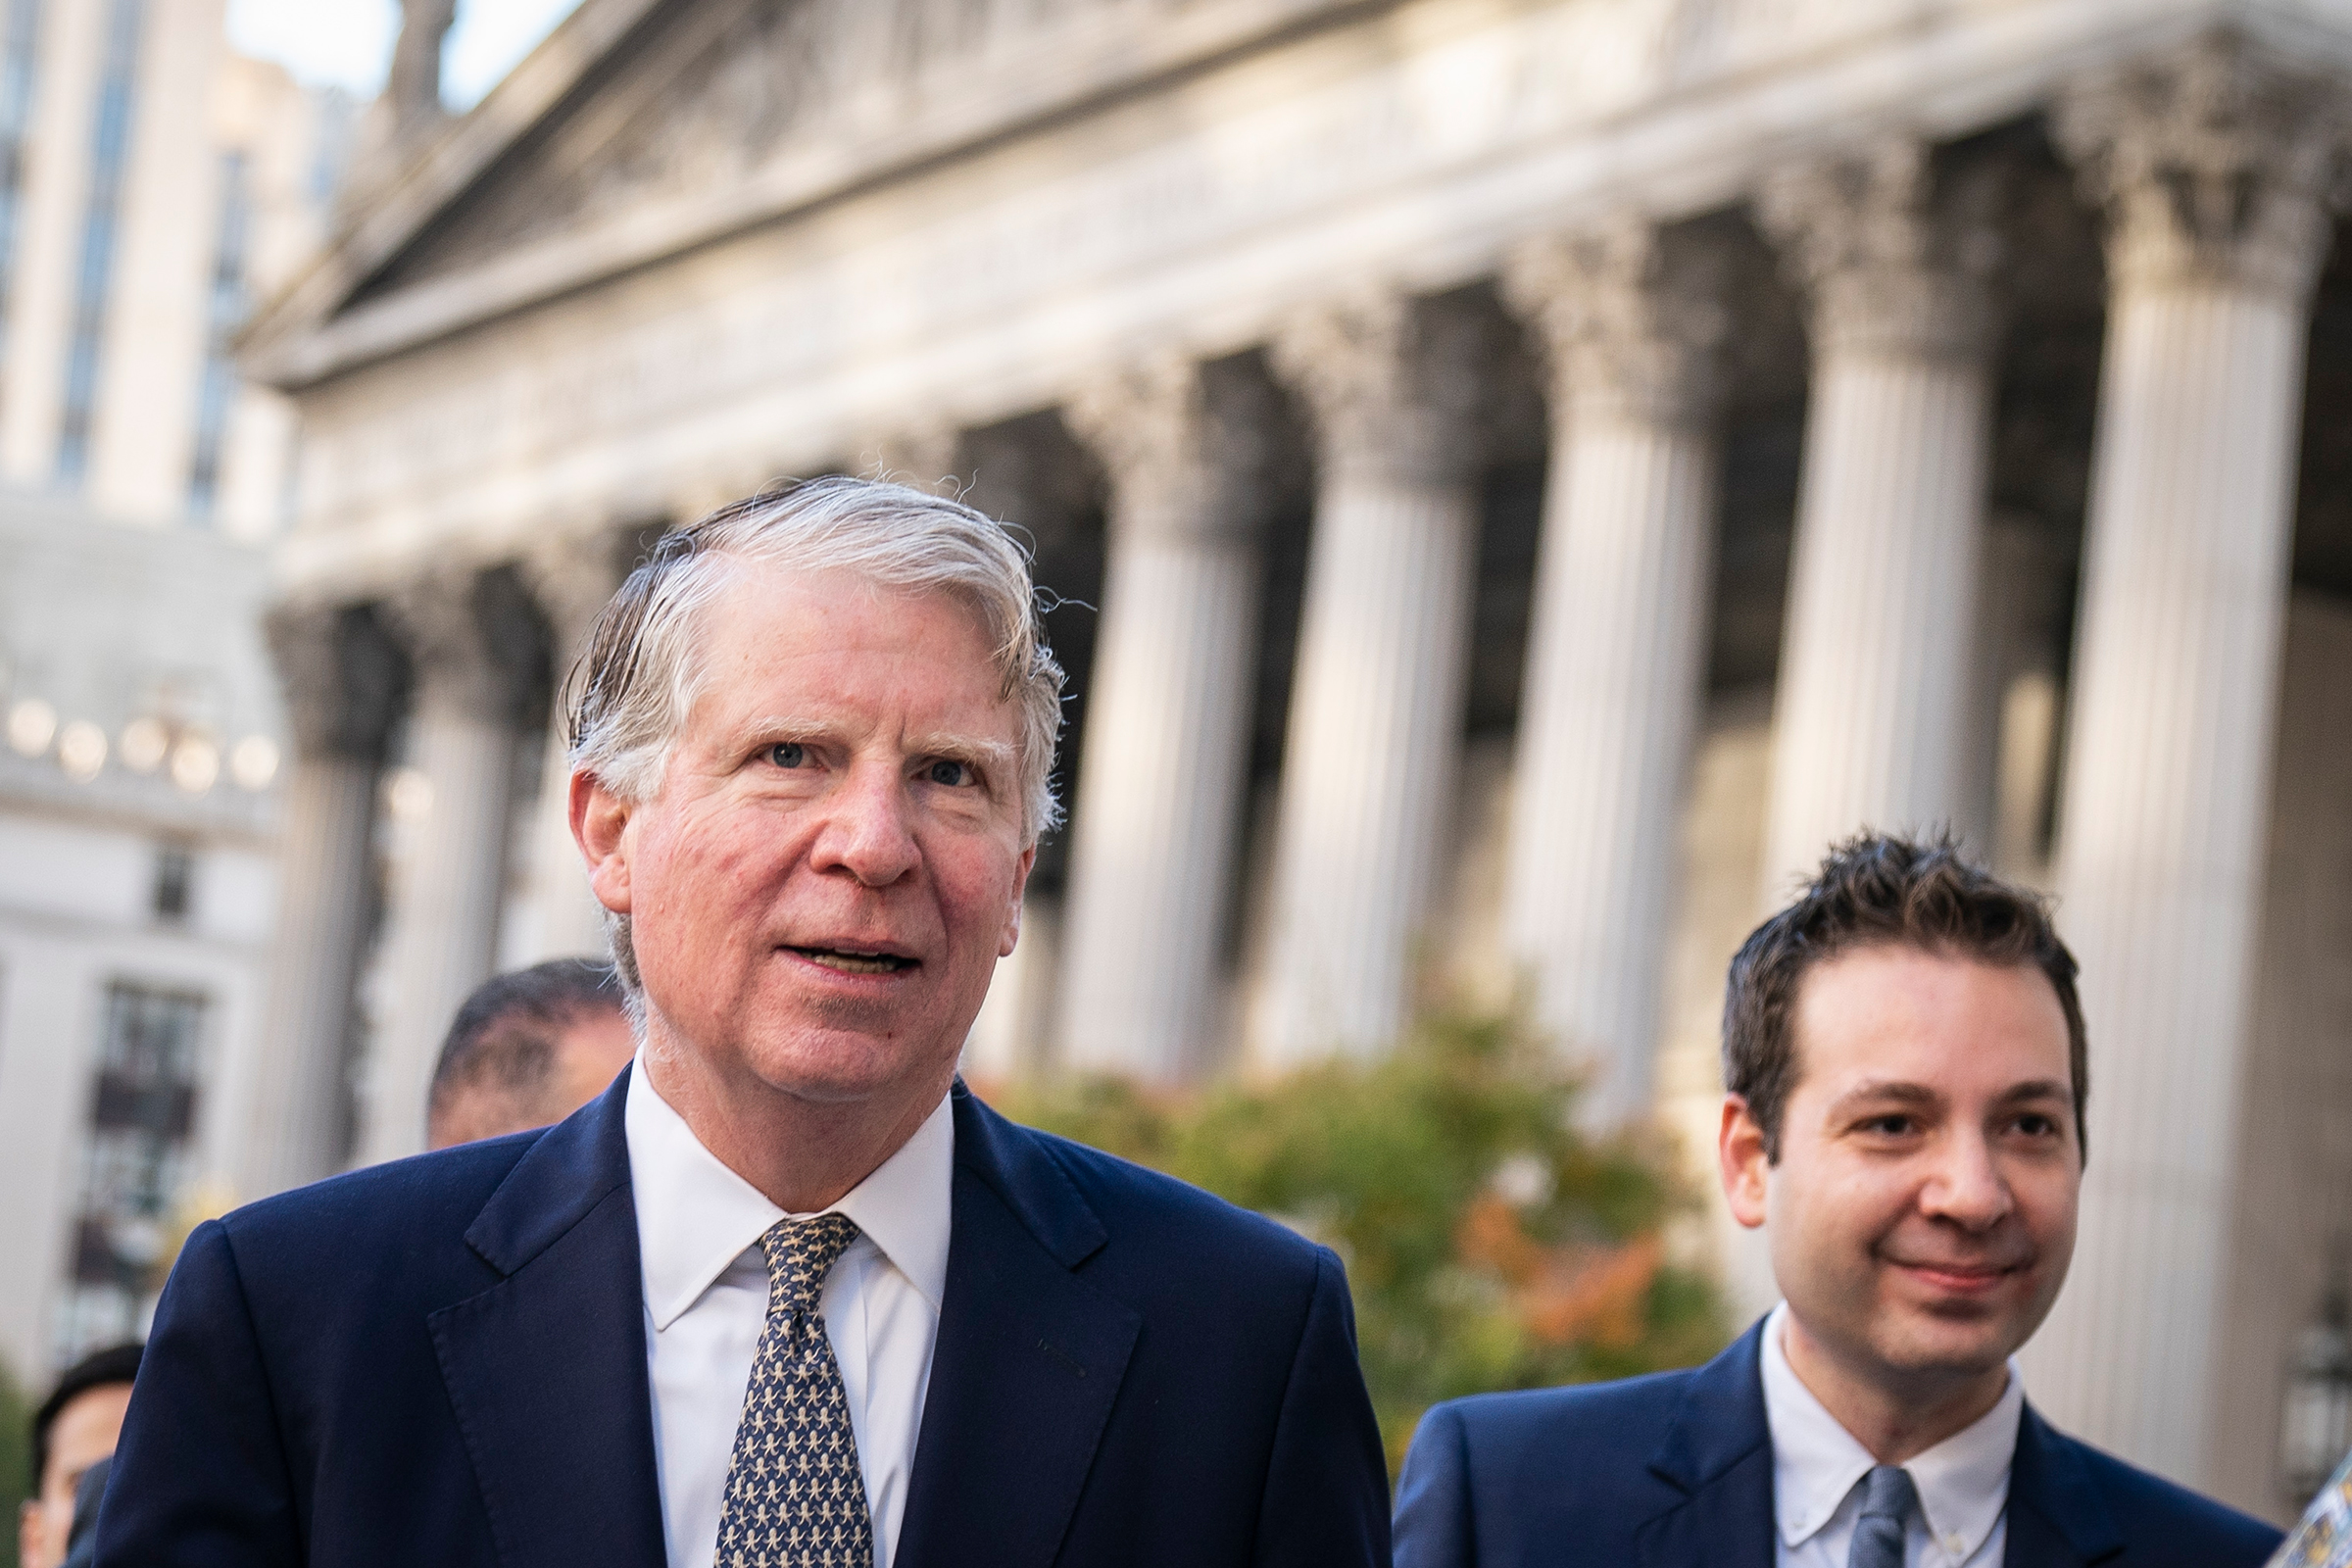 Manhattan District Attorney Cyrus Vance arrives at federal court for a hearing related to President Donald Trump's financial records on October 23, 2019, in New York City.